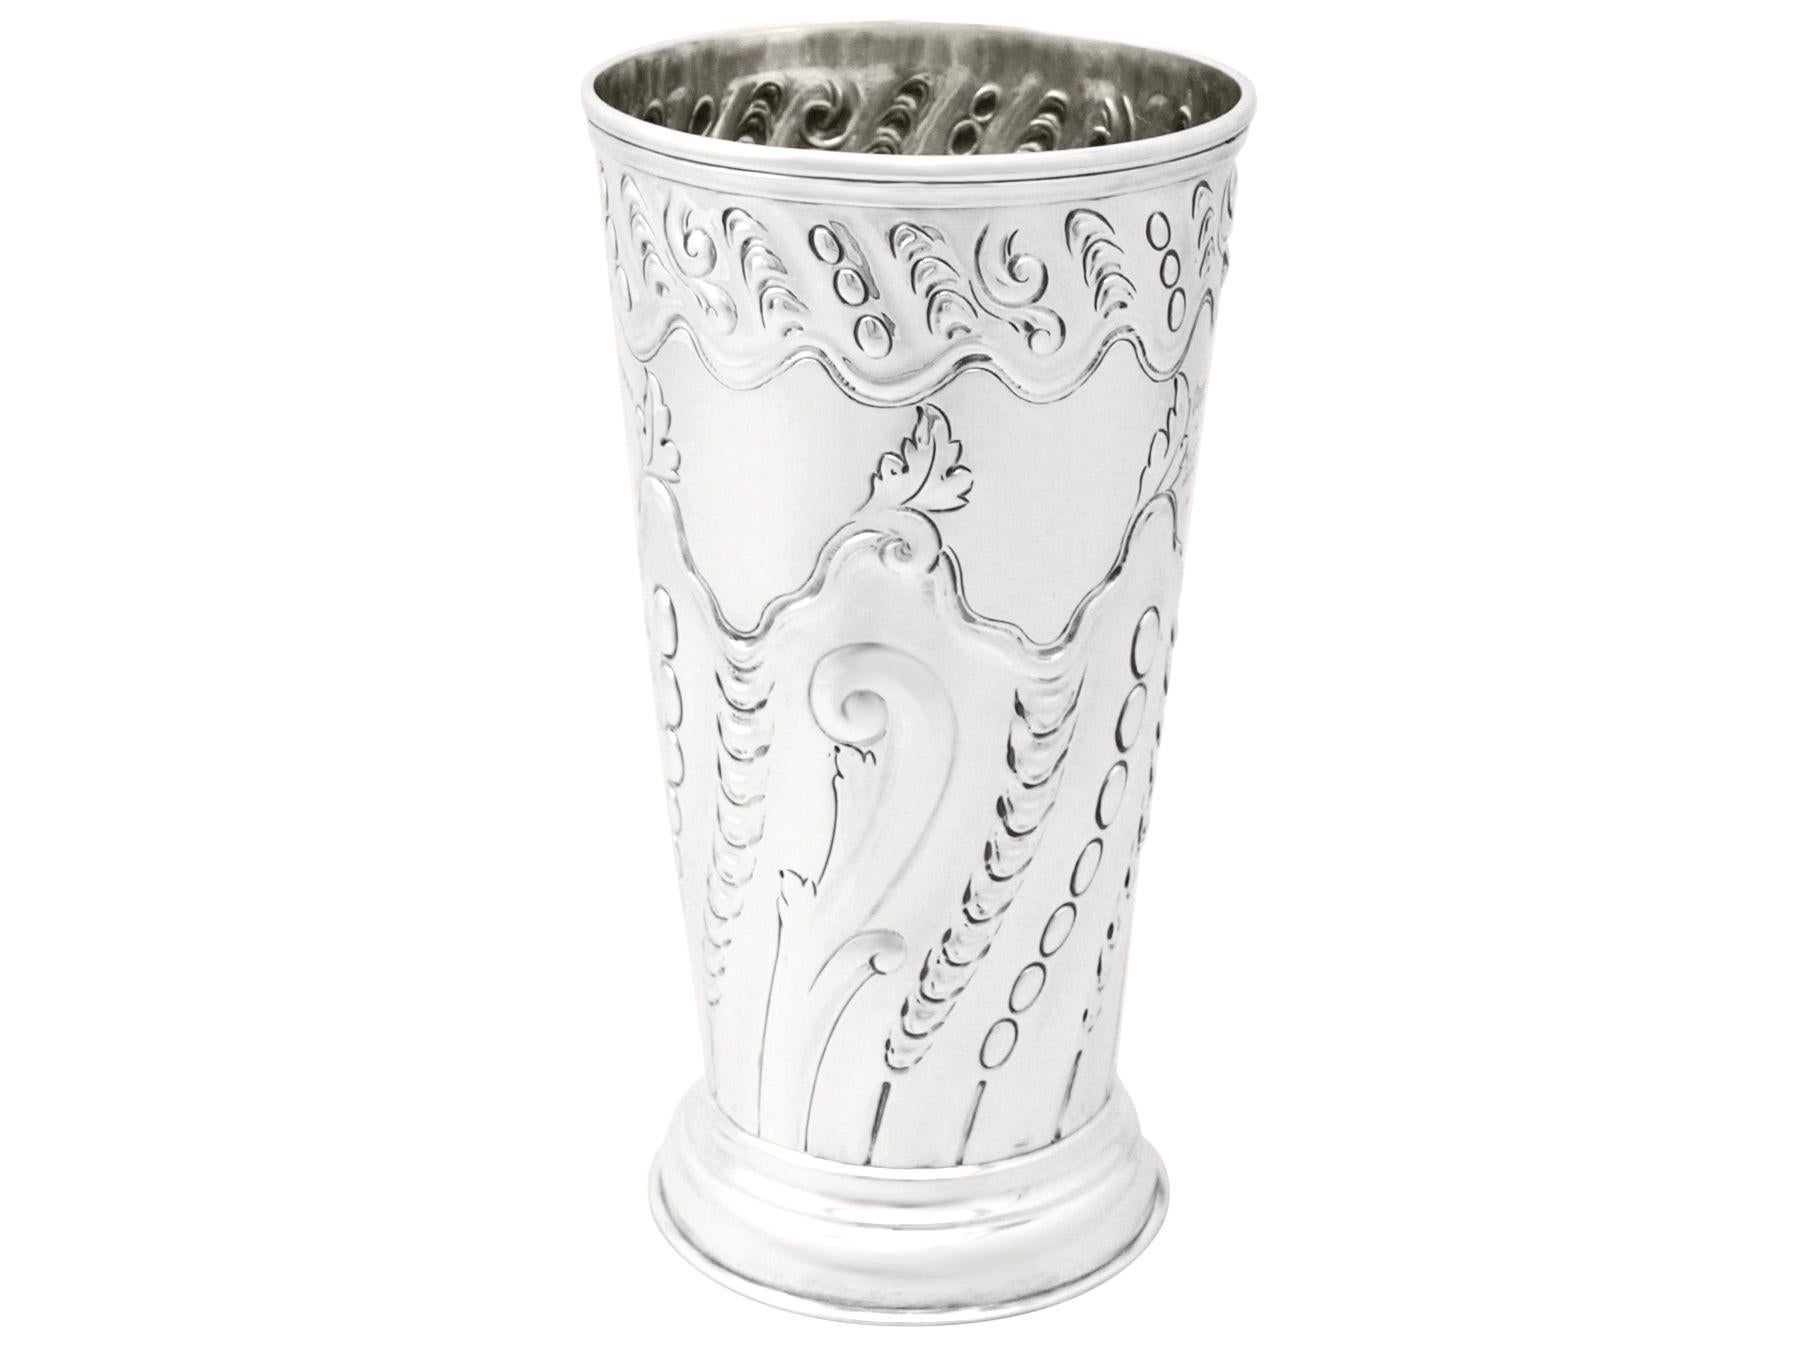 A fine and impressive antique Victorian English sterling silver vase with military interest (Durham Light Infantry); an addition to our ornamental silverware collection.

This fine antique Victorian sterling silver vase has a tapering cylindrical